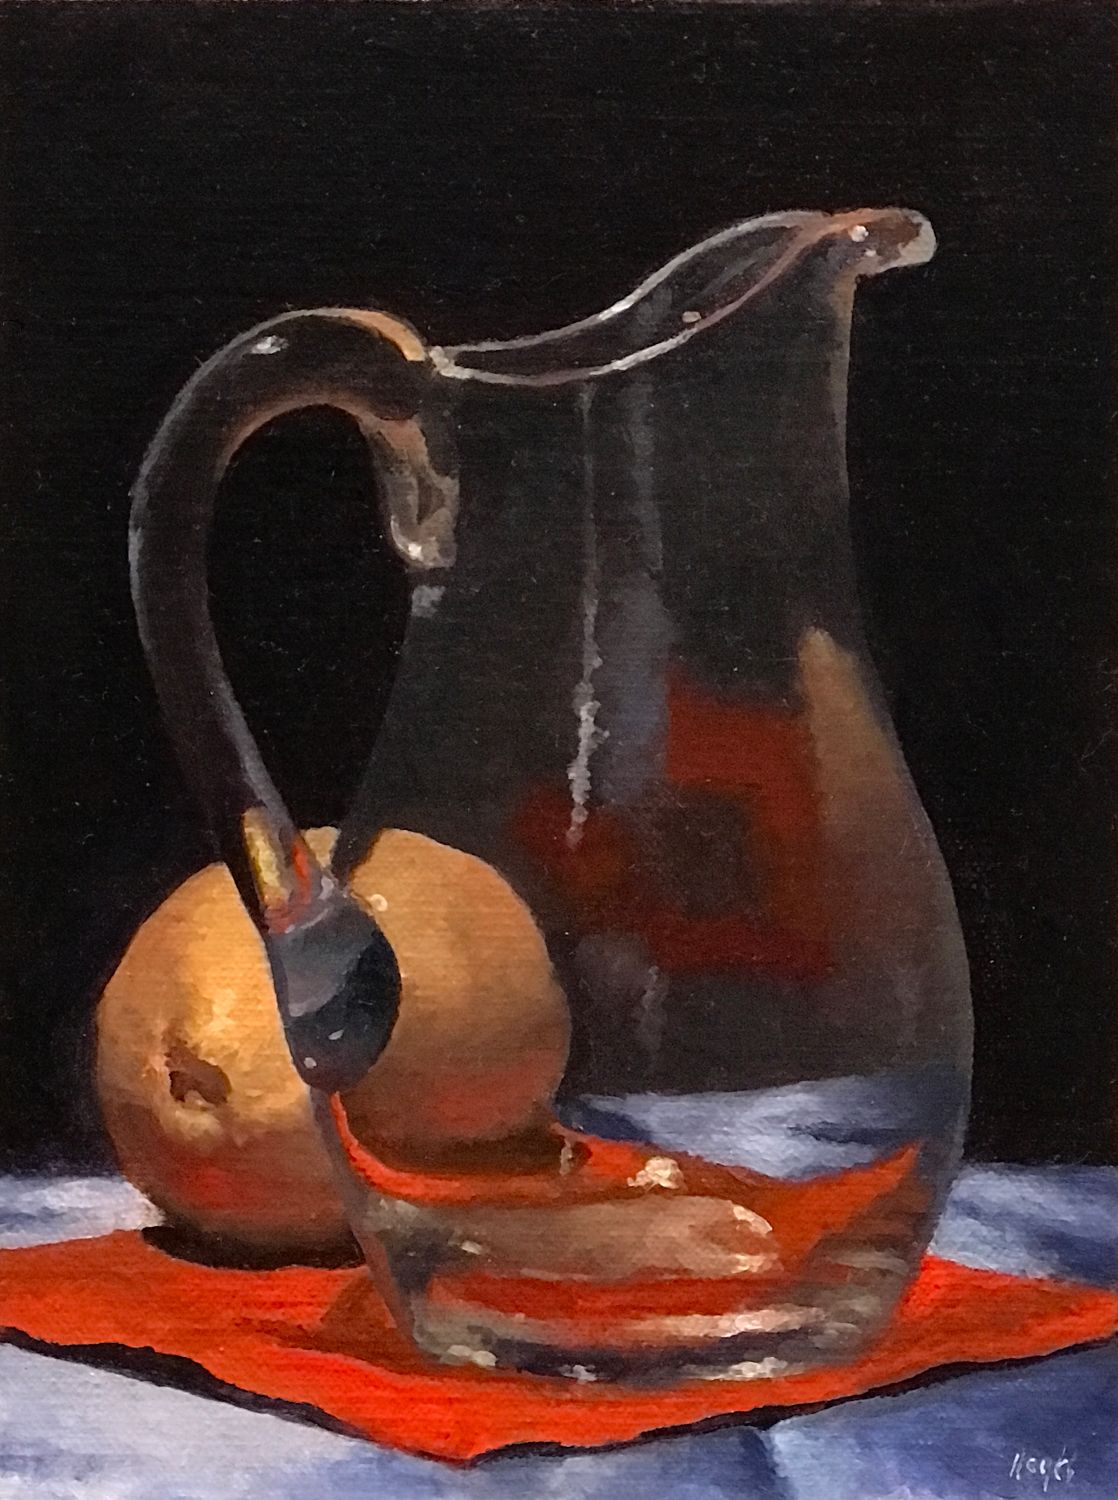 "Glass, Lemon, Blue Silk, Red Napkin" Oil on linen, 8x6 inches, 2021 (Available)